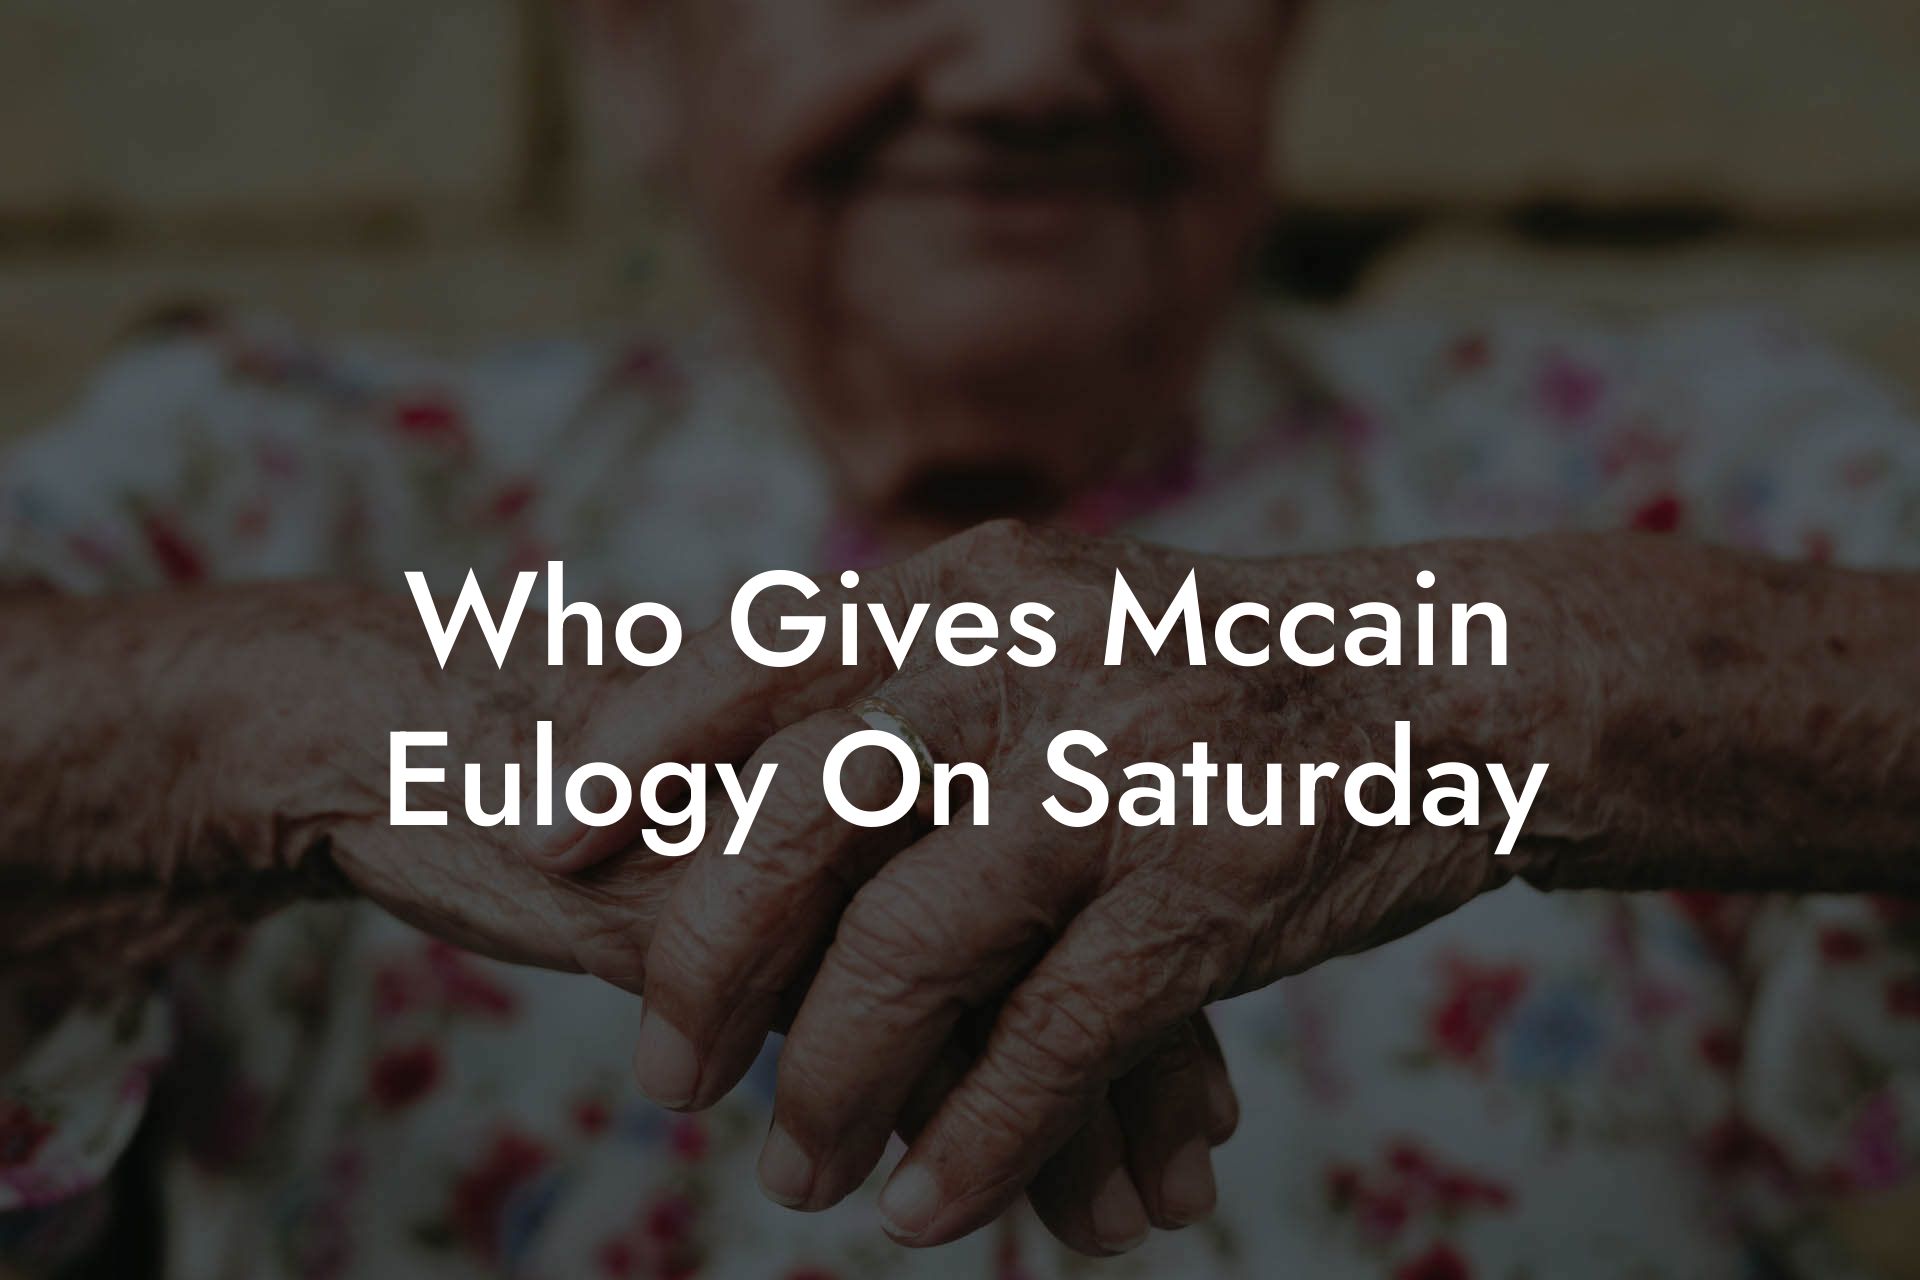 Who Gives Mccain Eulogy On Saturday